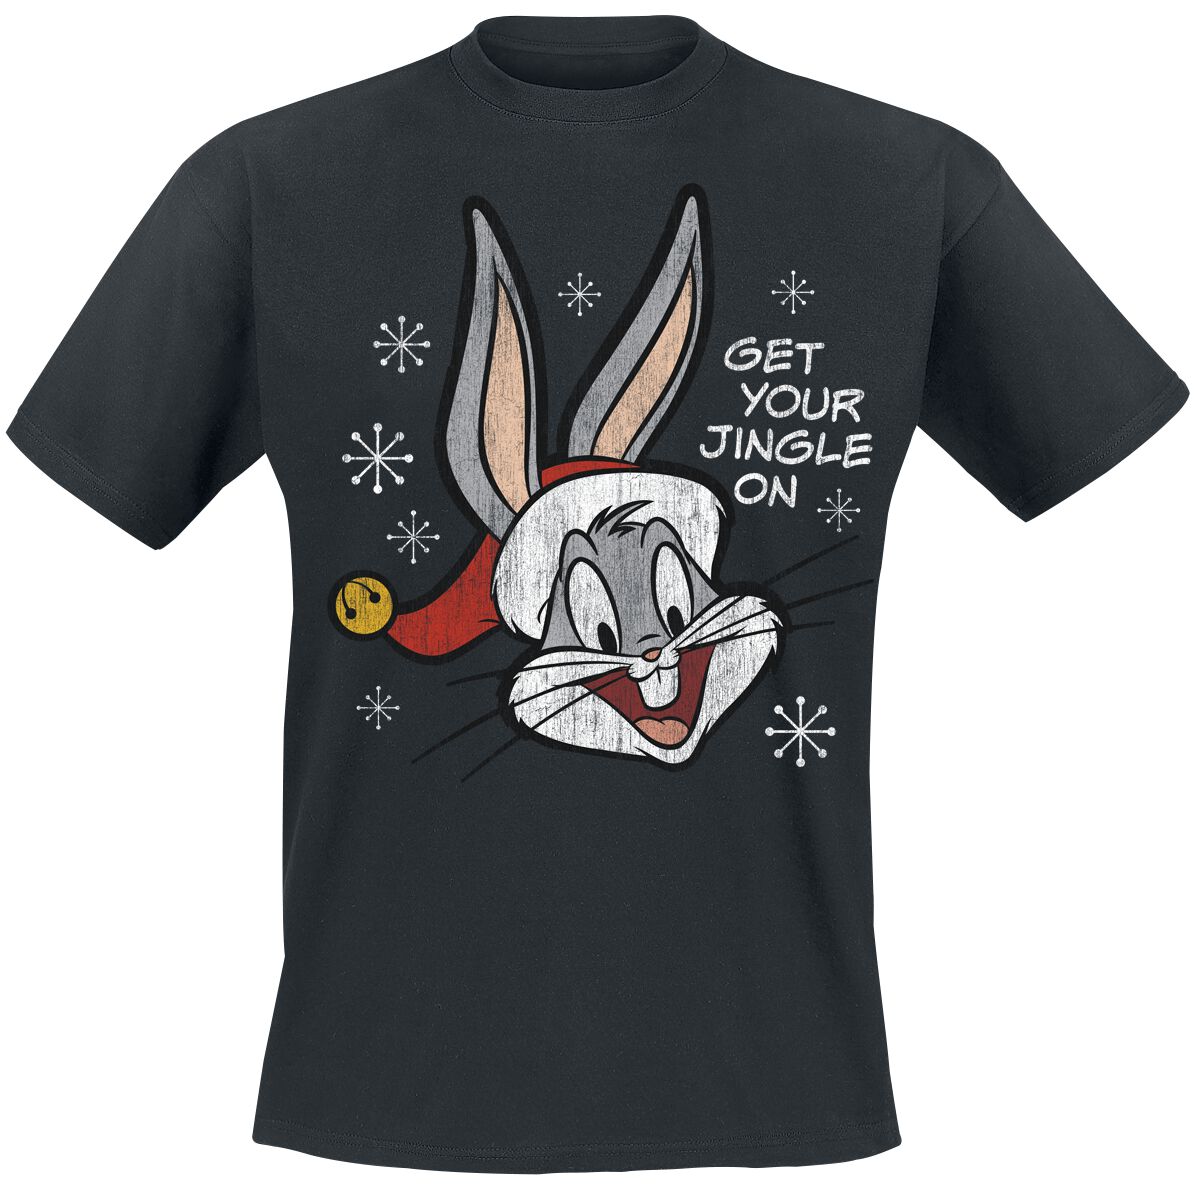 Looney Tunes Get Your Jingle On! T-Shirt black